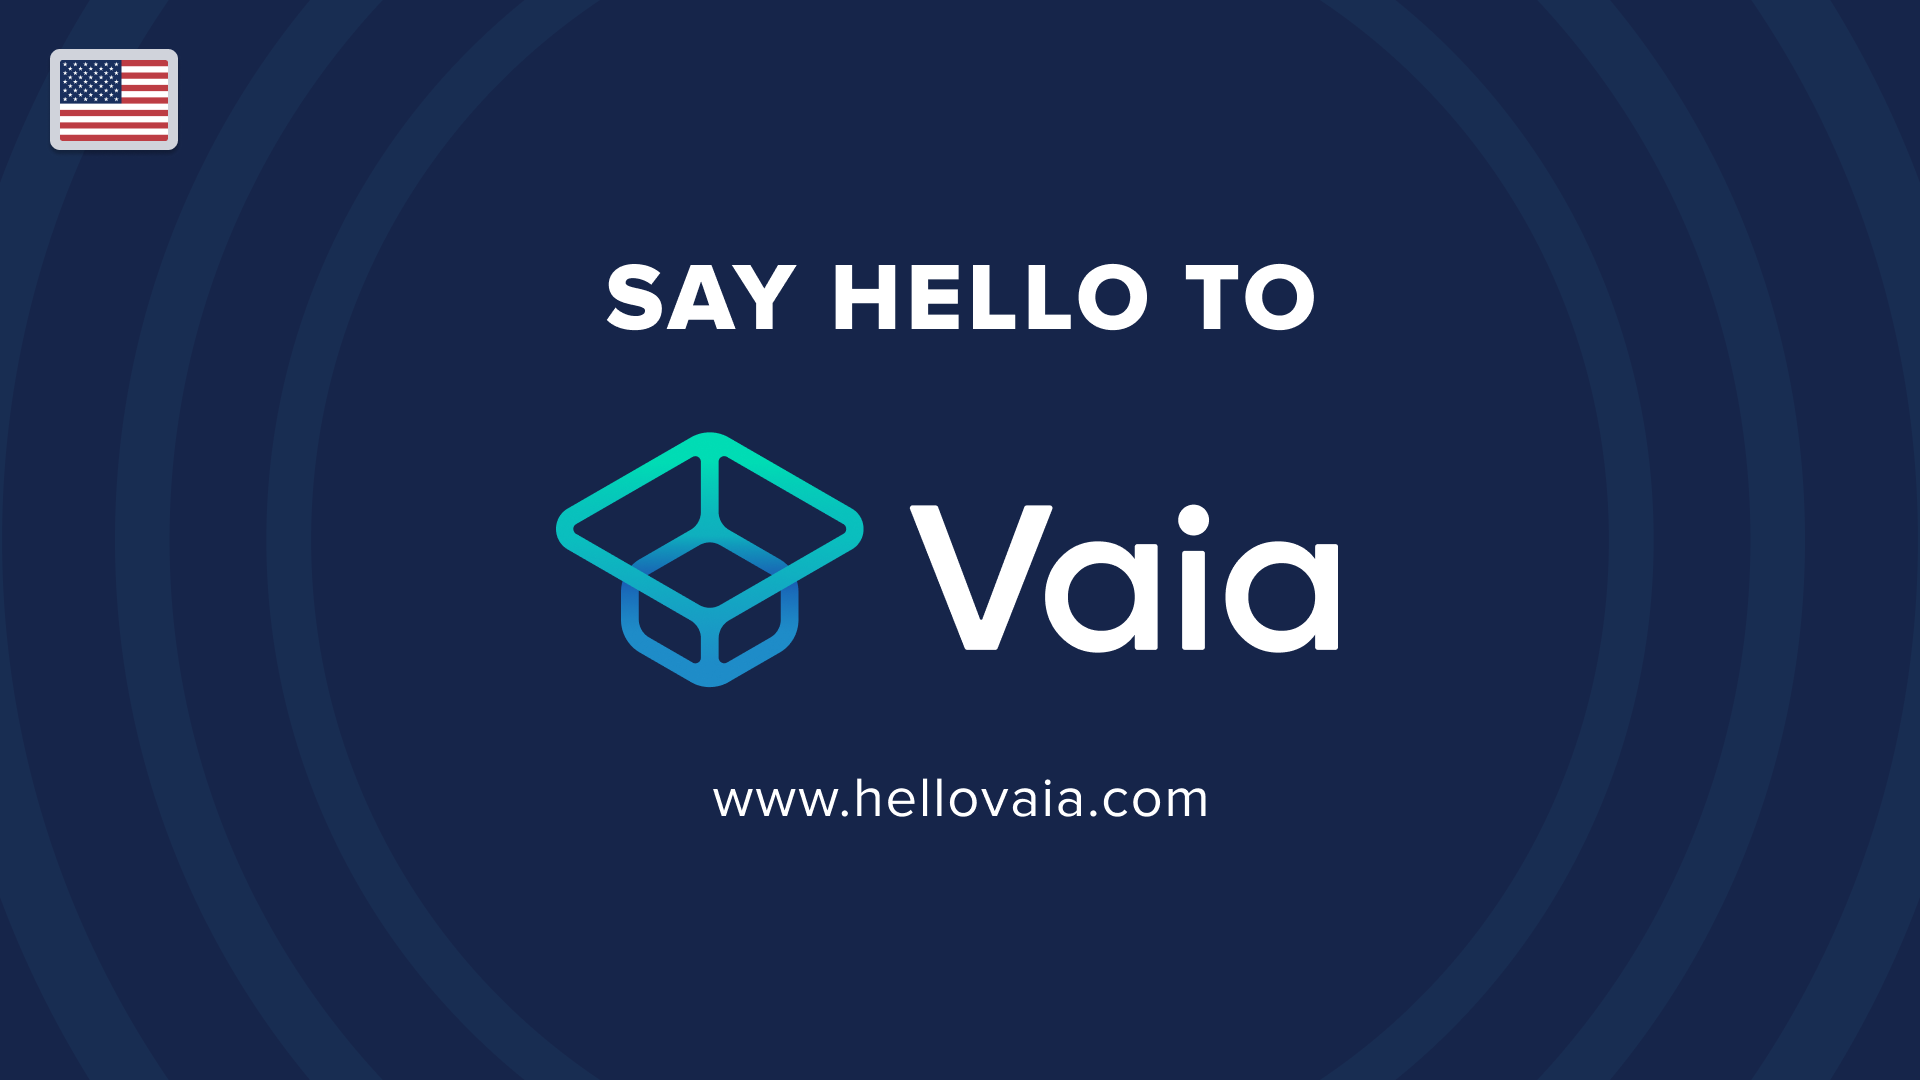 Say hello to Vaia as StudySmarter, the award-winning EdTech company, announces a new brand name Vaia in the US and Spain